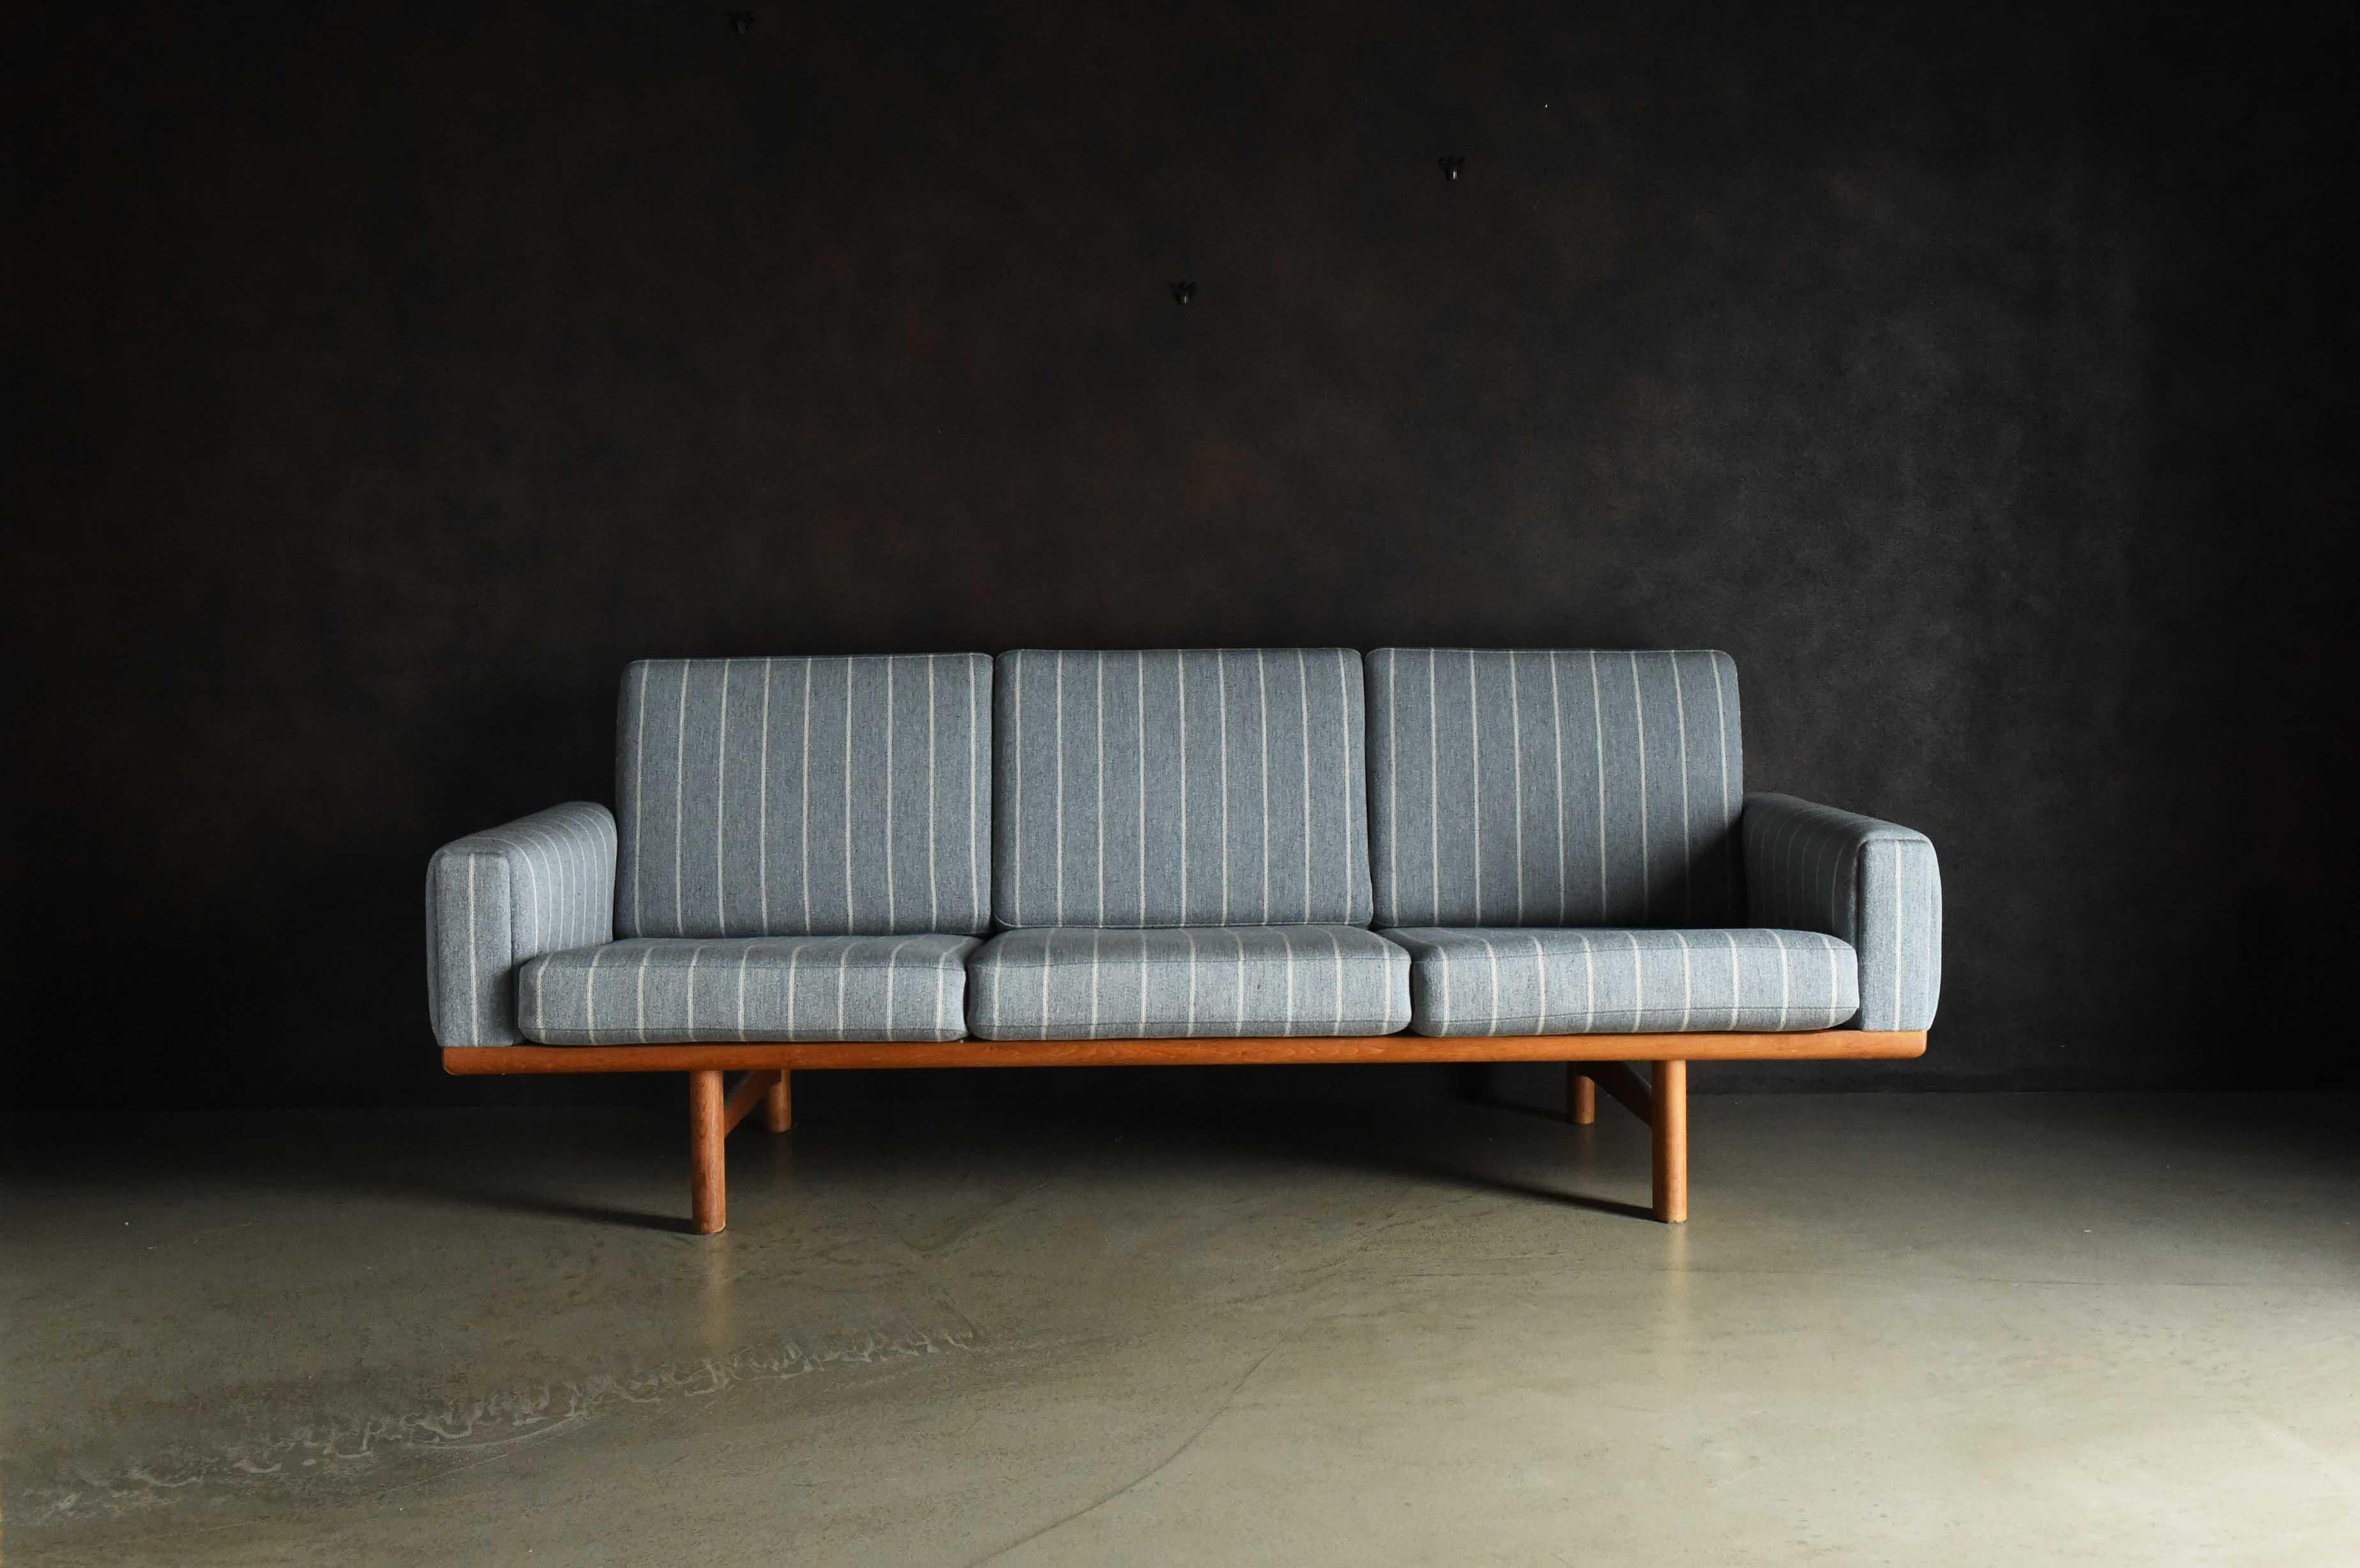 This is a three-seater sofa manufactured by GETAMA. Its simple design features linear lines, but the angled seat and backrest have been carefully calculated to minimize stress on the body and lower back when sitting deeply. Working in collaboration